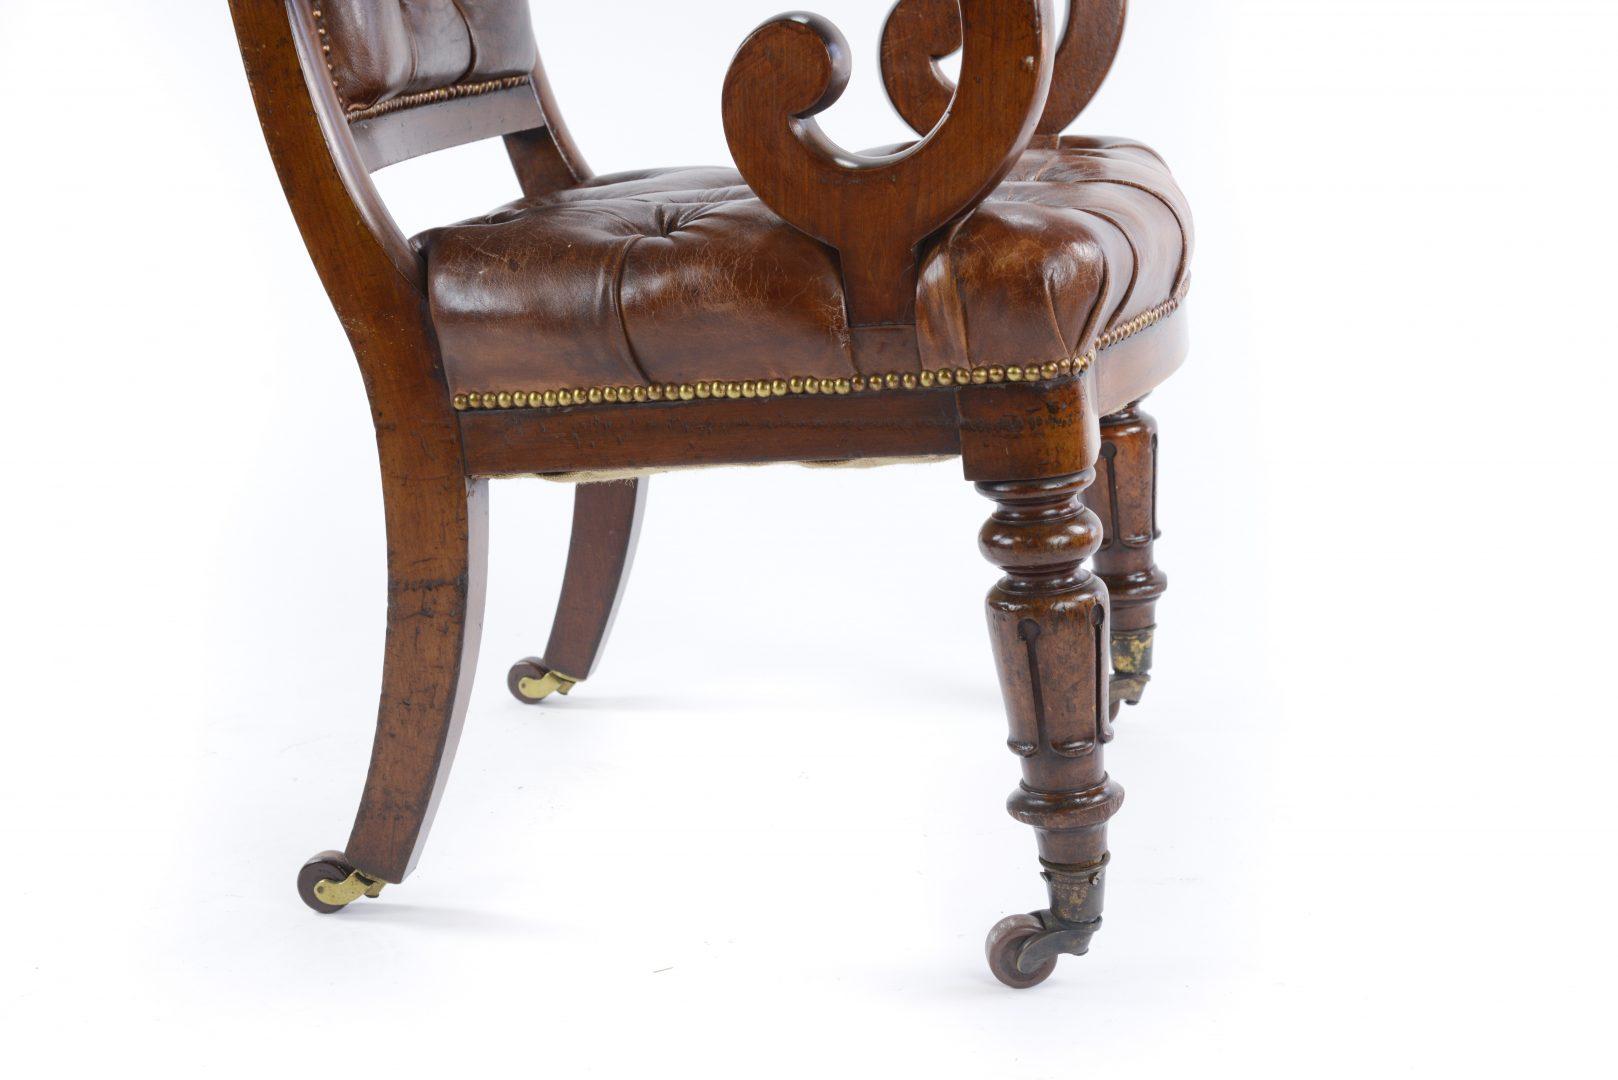 British William iv Mahogany Desk or Library Chair attributed to Gillows 